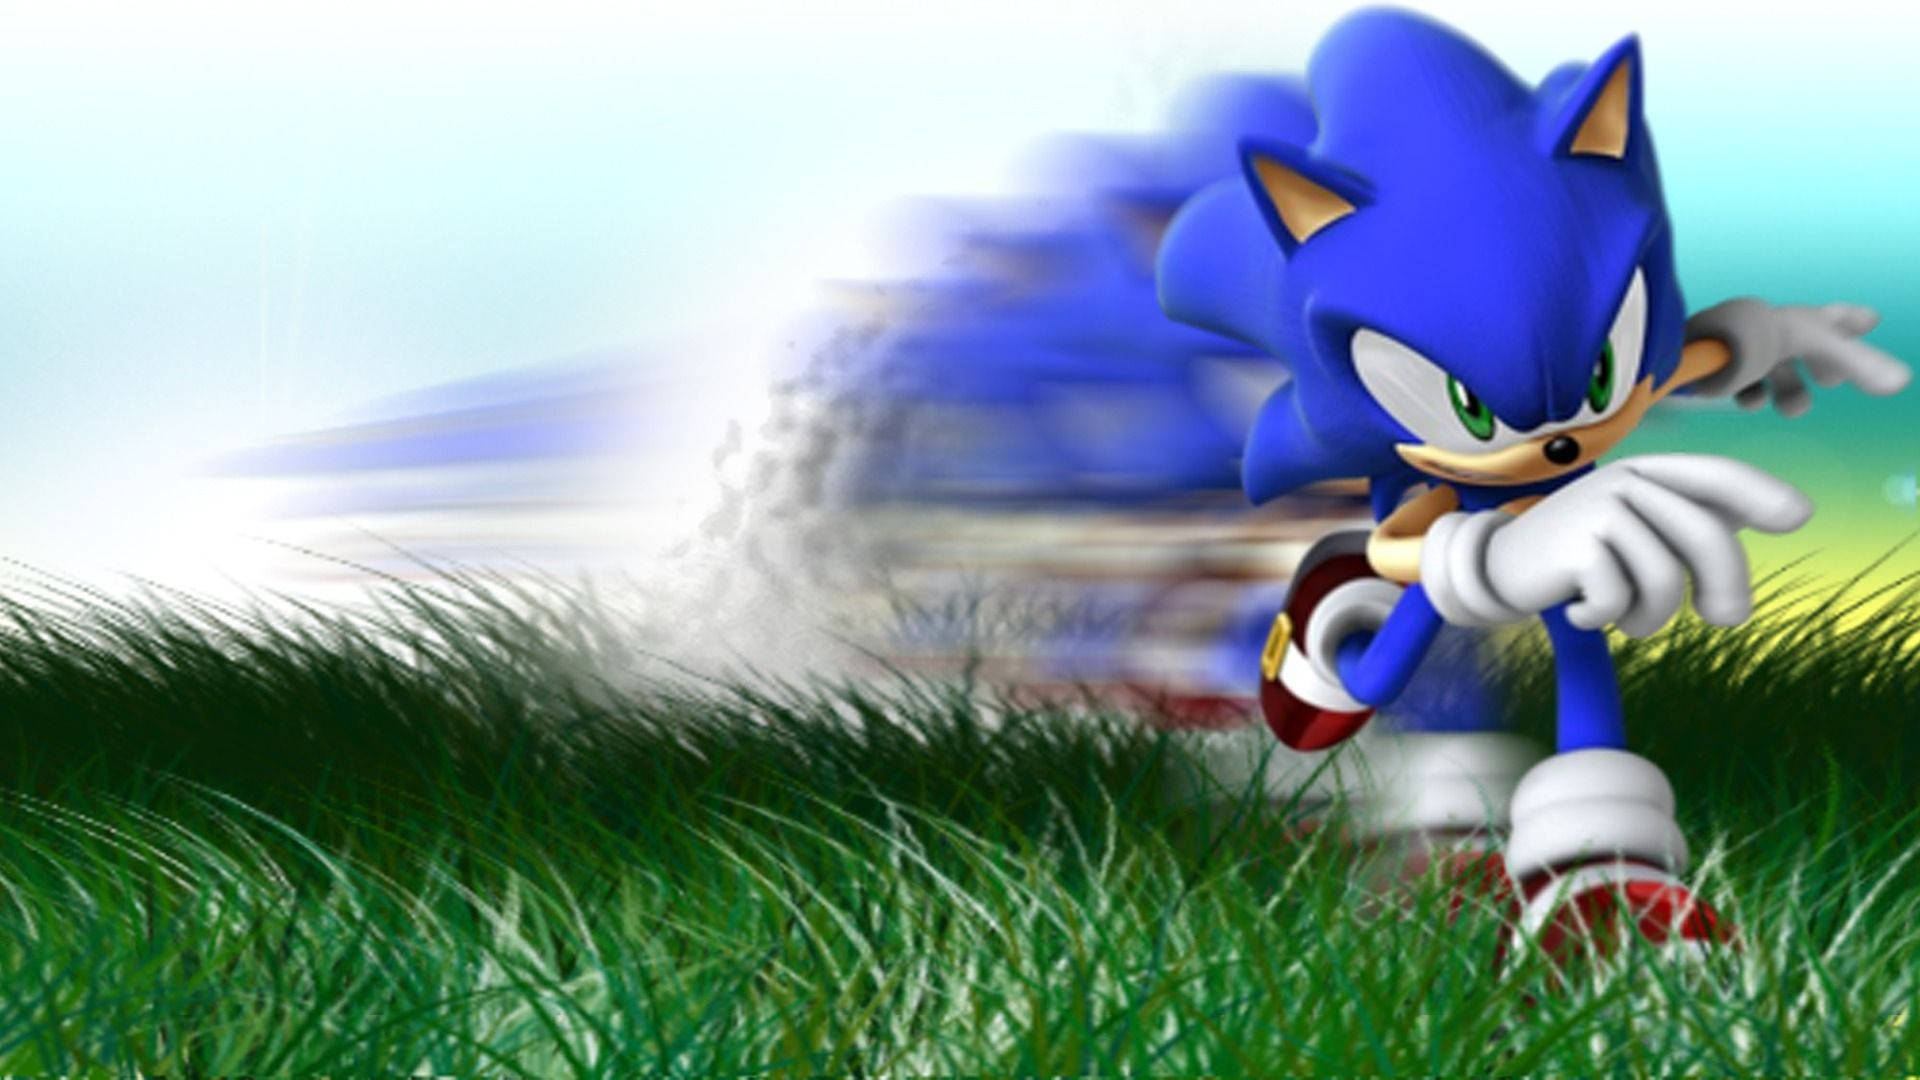 HD wallpaper. of Sonic the Hedgehog animated running in a grass field.